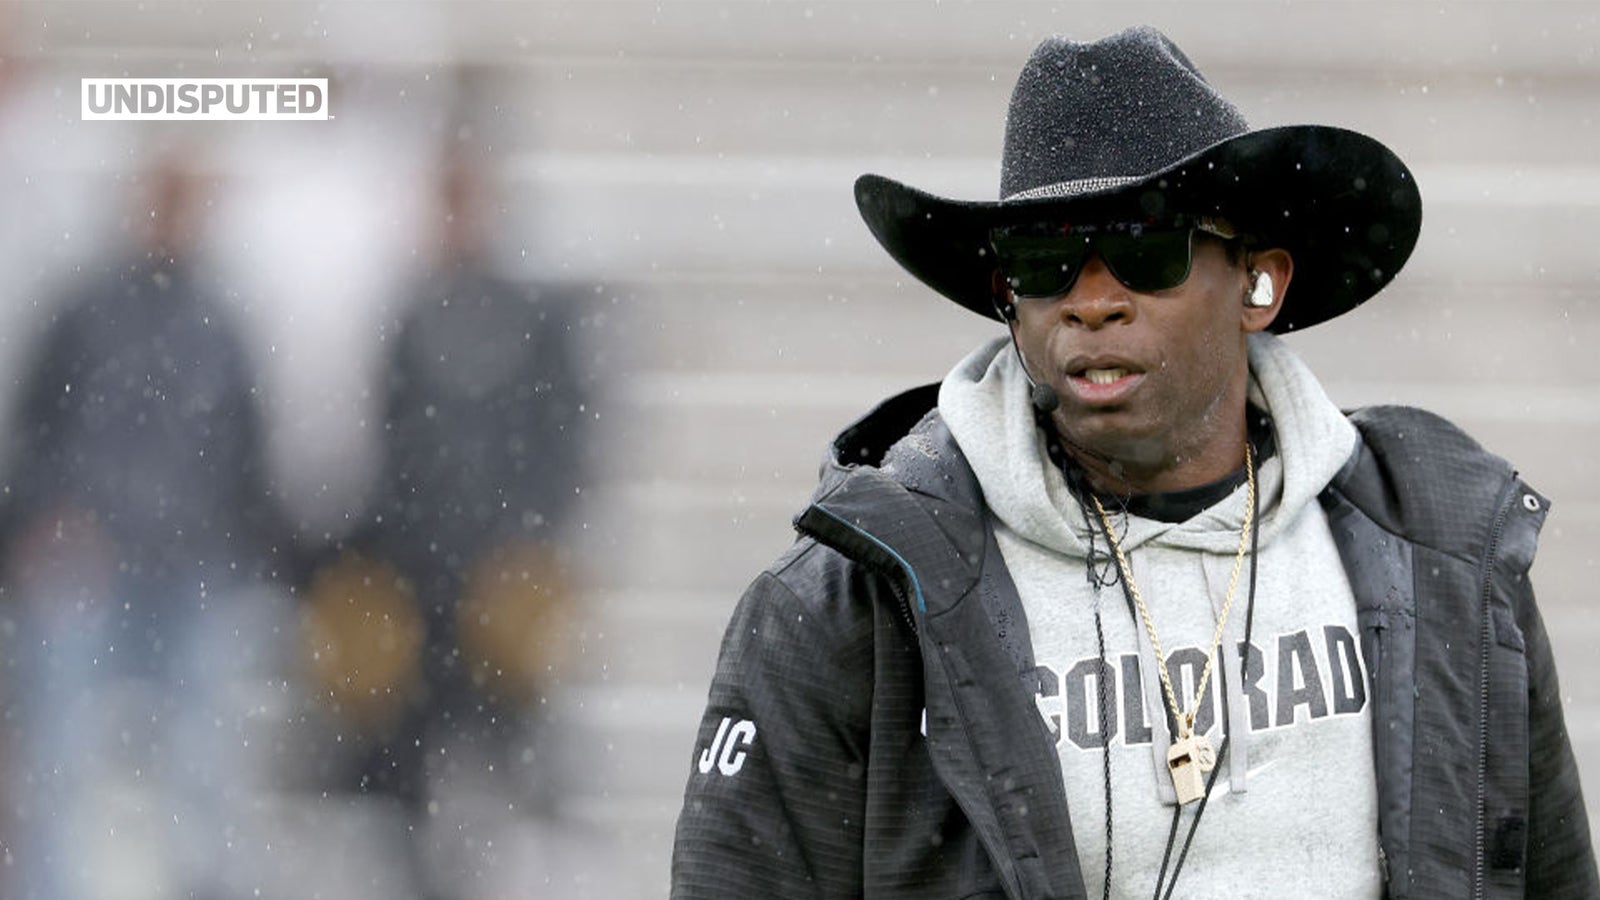 Deion Sanders on future with Colorado: 'I plan on being here and being dominant' 